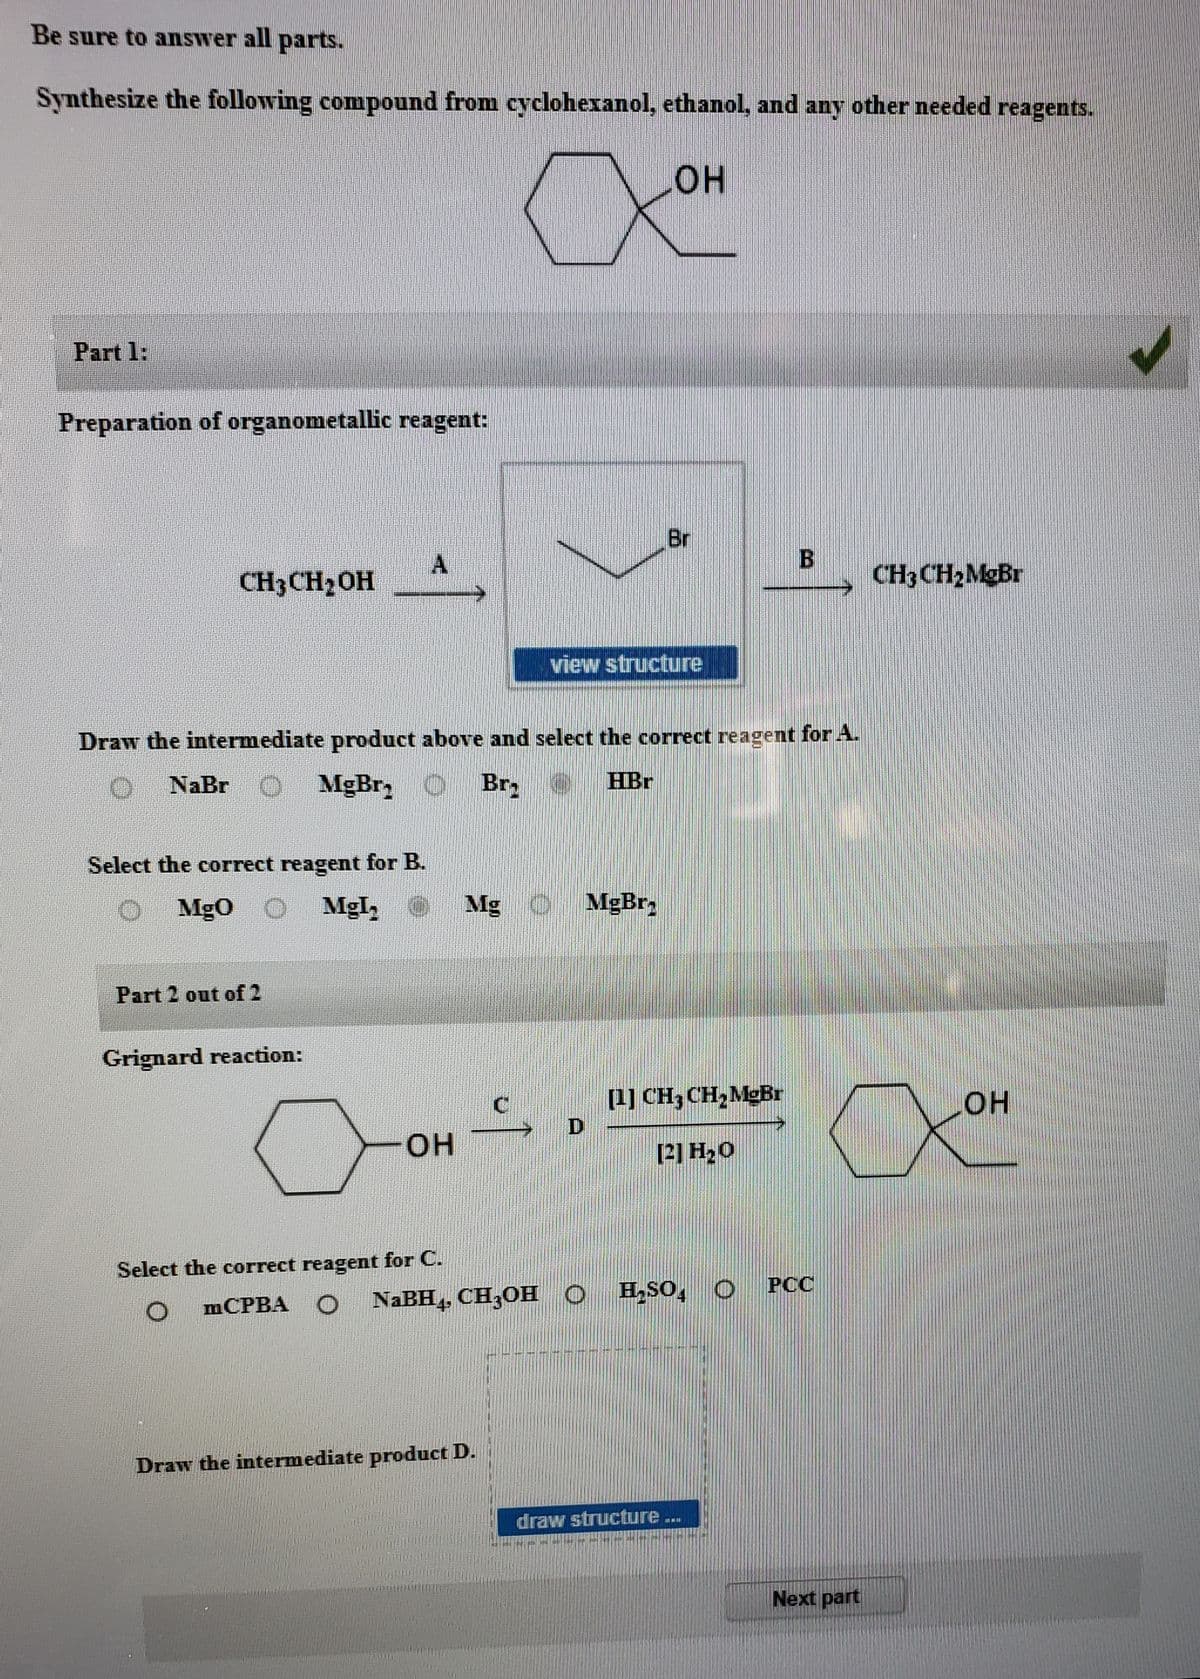 Be sure to answer all parts.
Synthesize the following compound from cyclohexanol, ethanol, and any other needed reagents.
он
Part 1:
Preparation of organometallic reagent:
Br
CH3CH2OH
CH3 CH2MgBr
view structure
Draw the intermediate product above and select the correct reagent for A.
NaBr
MgBr, O
Br
HBr
Select the correct reagent for B.
Mg0
Mgl,
Mg
MgBr,
Part 2 out of 2
Grignard reaction:
[1] CH3 CH,MgBr
HO
он
[2] H20
Select the correct reagent for C.
NaBH CHOНО
H,SO, O
РСС
MCPBA O
Draw the intermediate product D.
draw structure ..
Next part
B.
